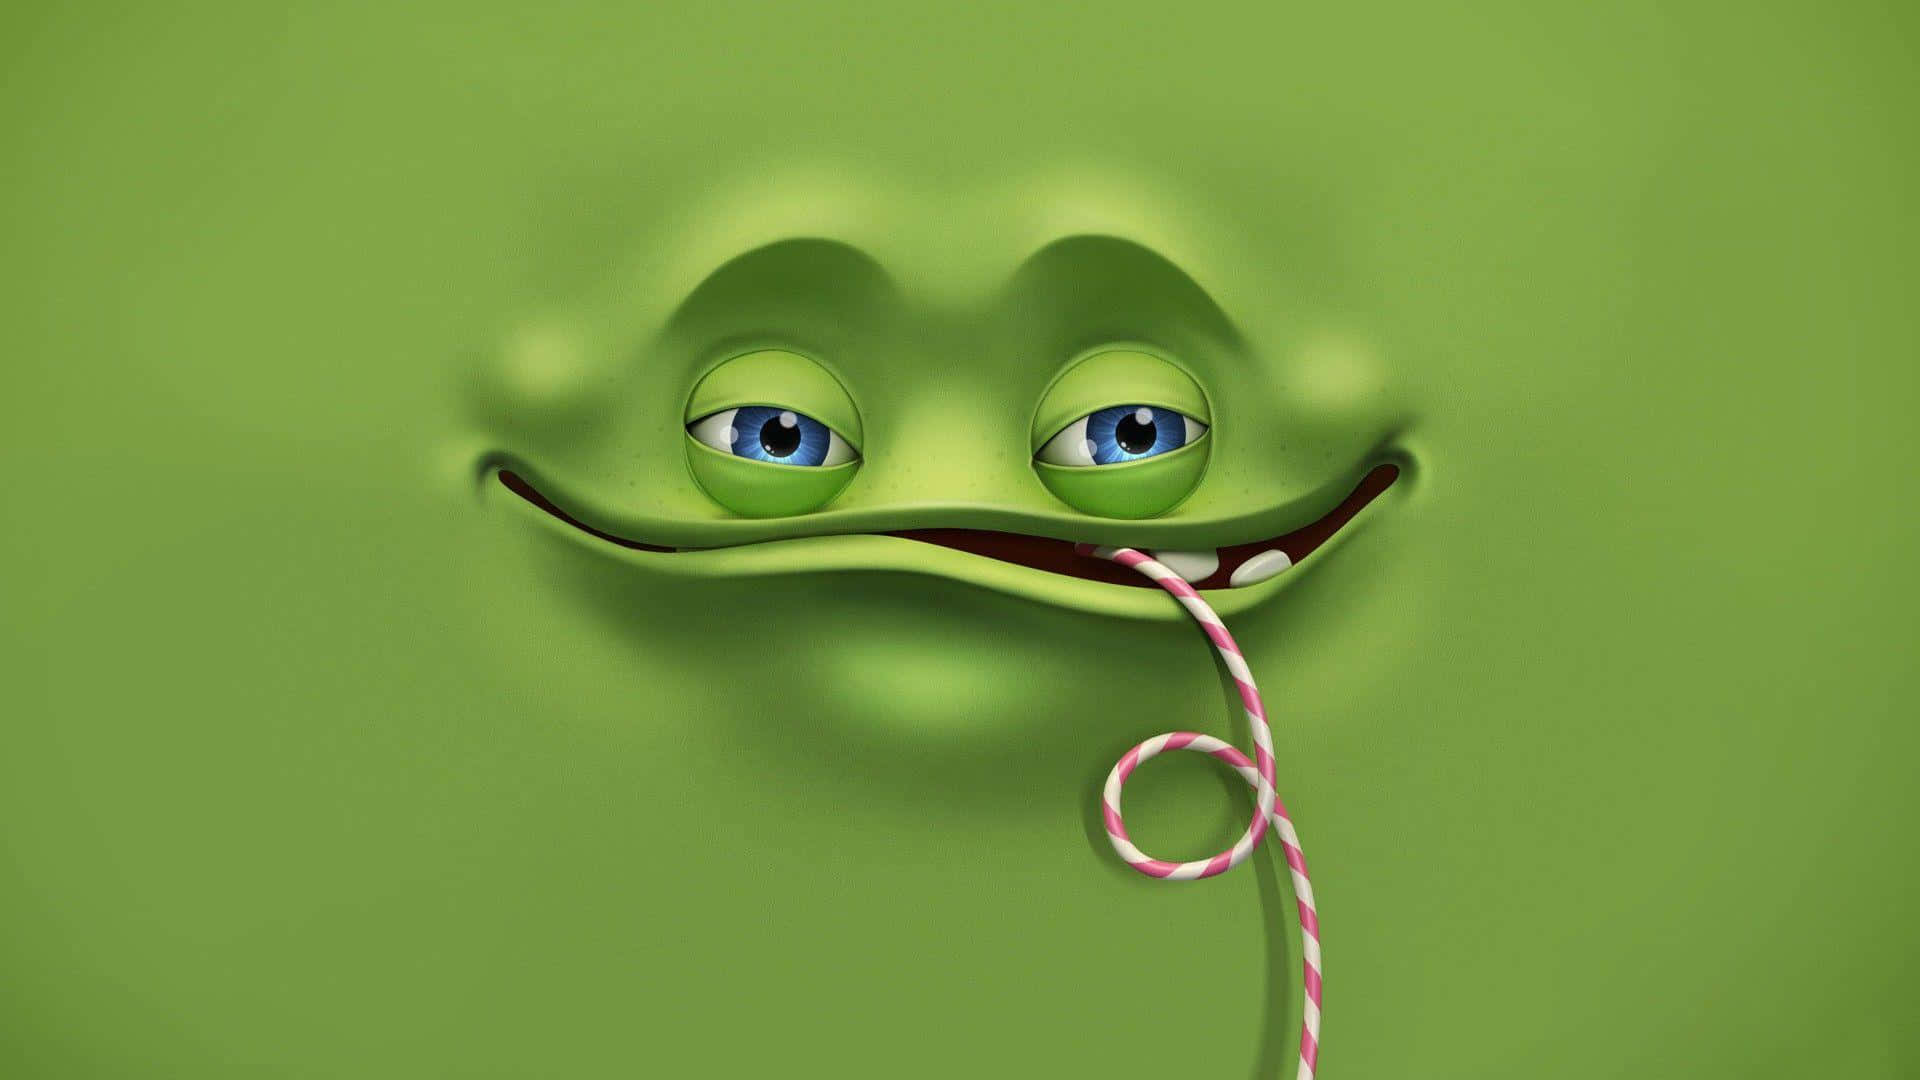 a green frog with blue eyes and a candy cane